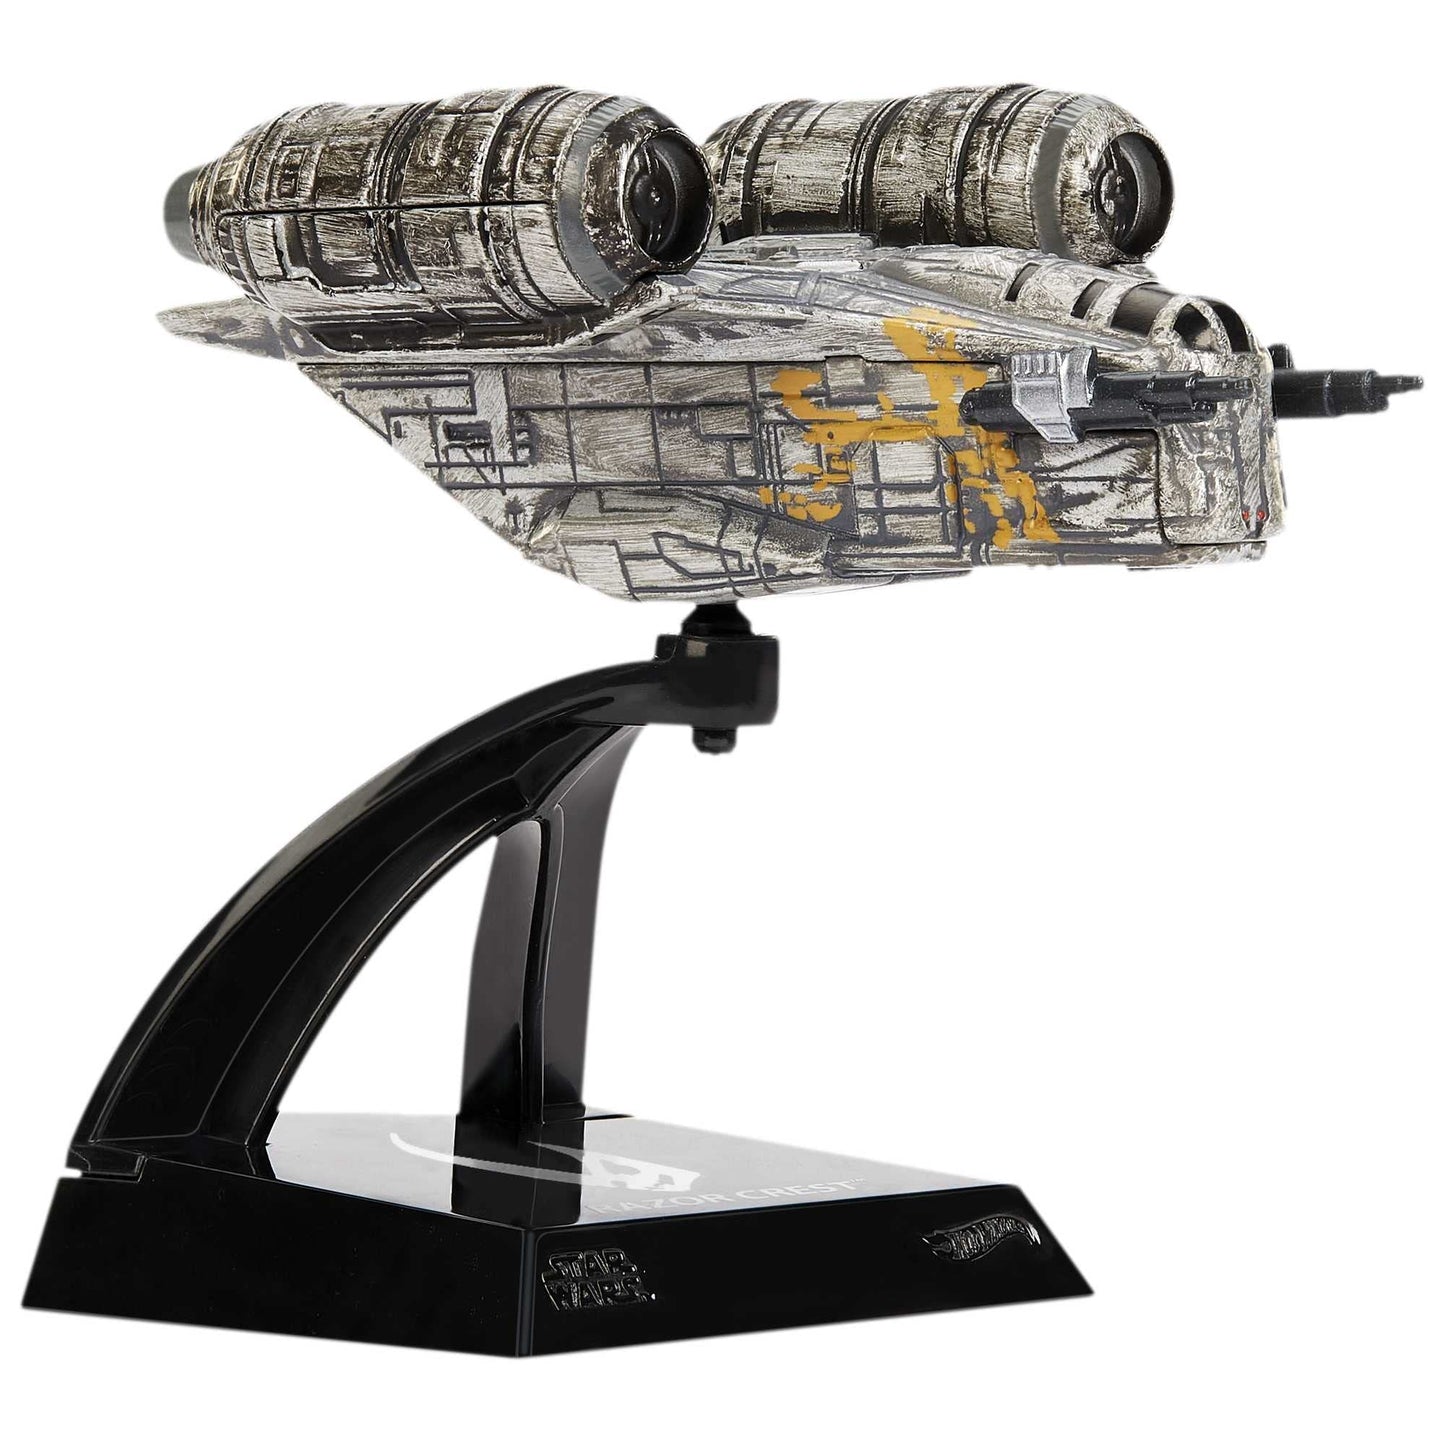 Hot Wheels Star Wars Starships Select, Premium Replica of Razor Crest, Moveable Parts, Premium Stand, Gift for Adult Collectors